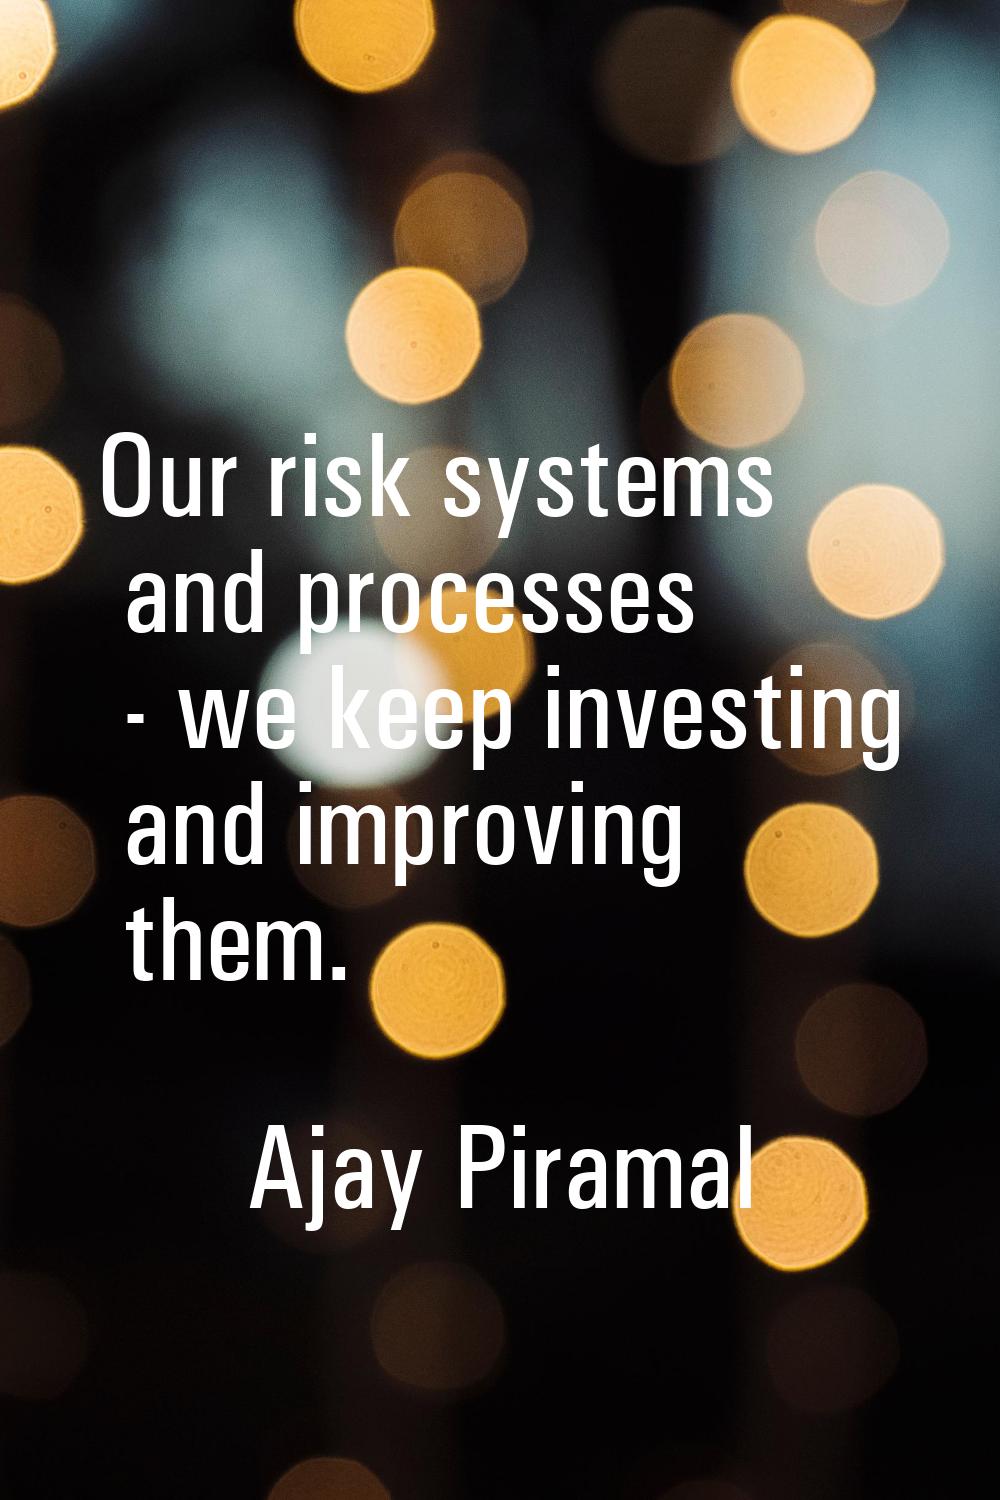 Our risk systems and processes - we keep investing and improving them.